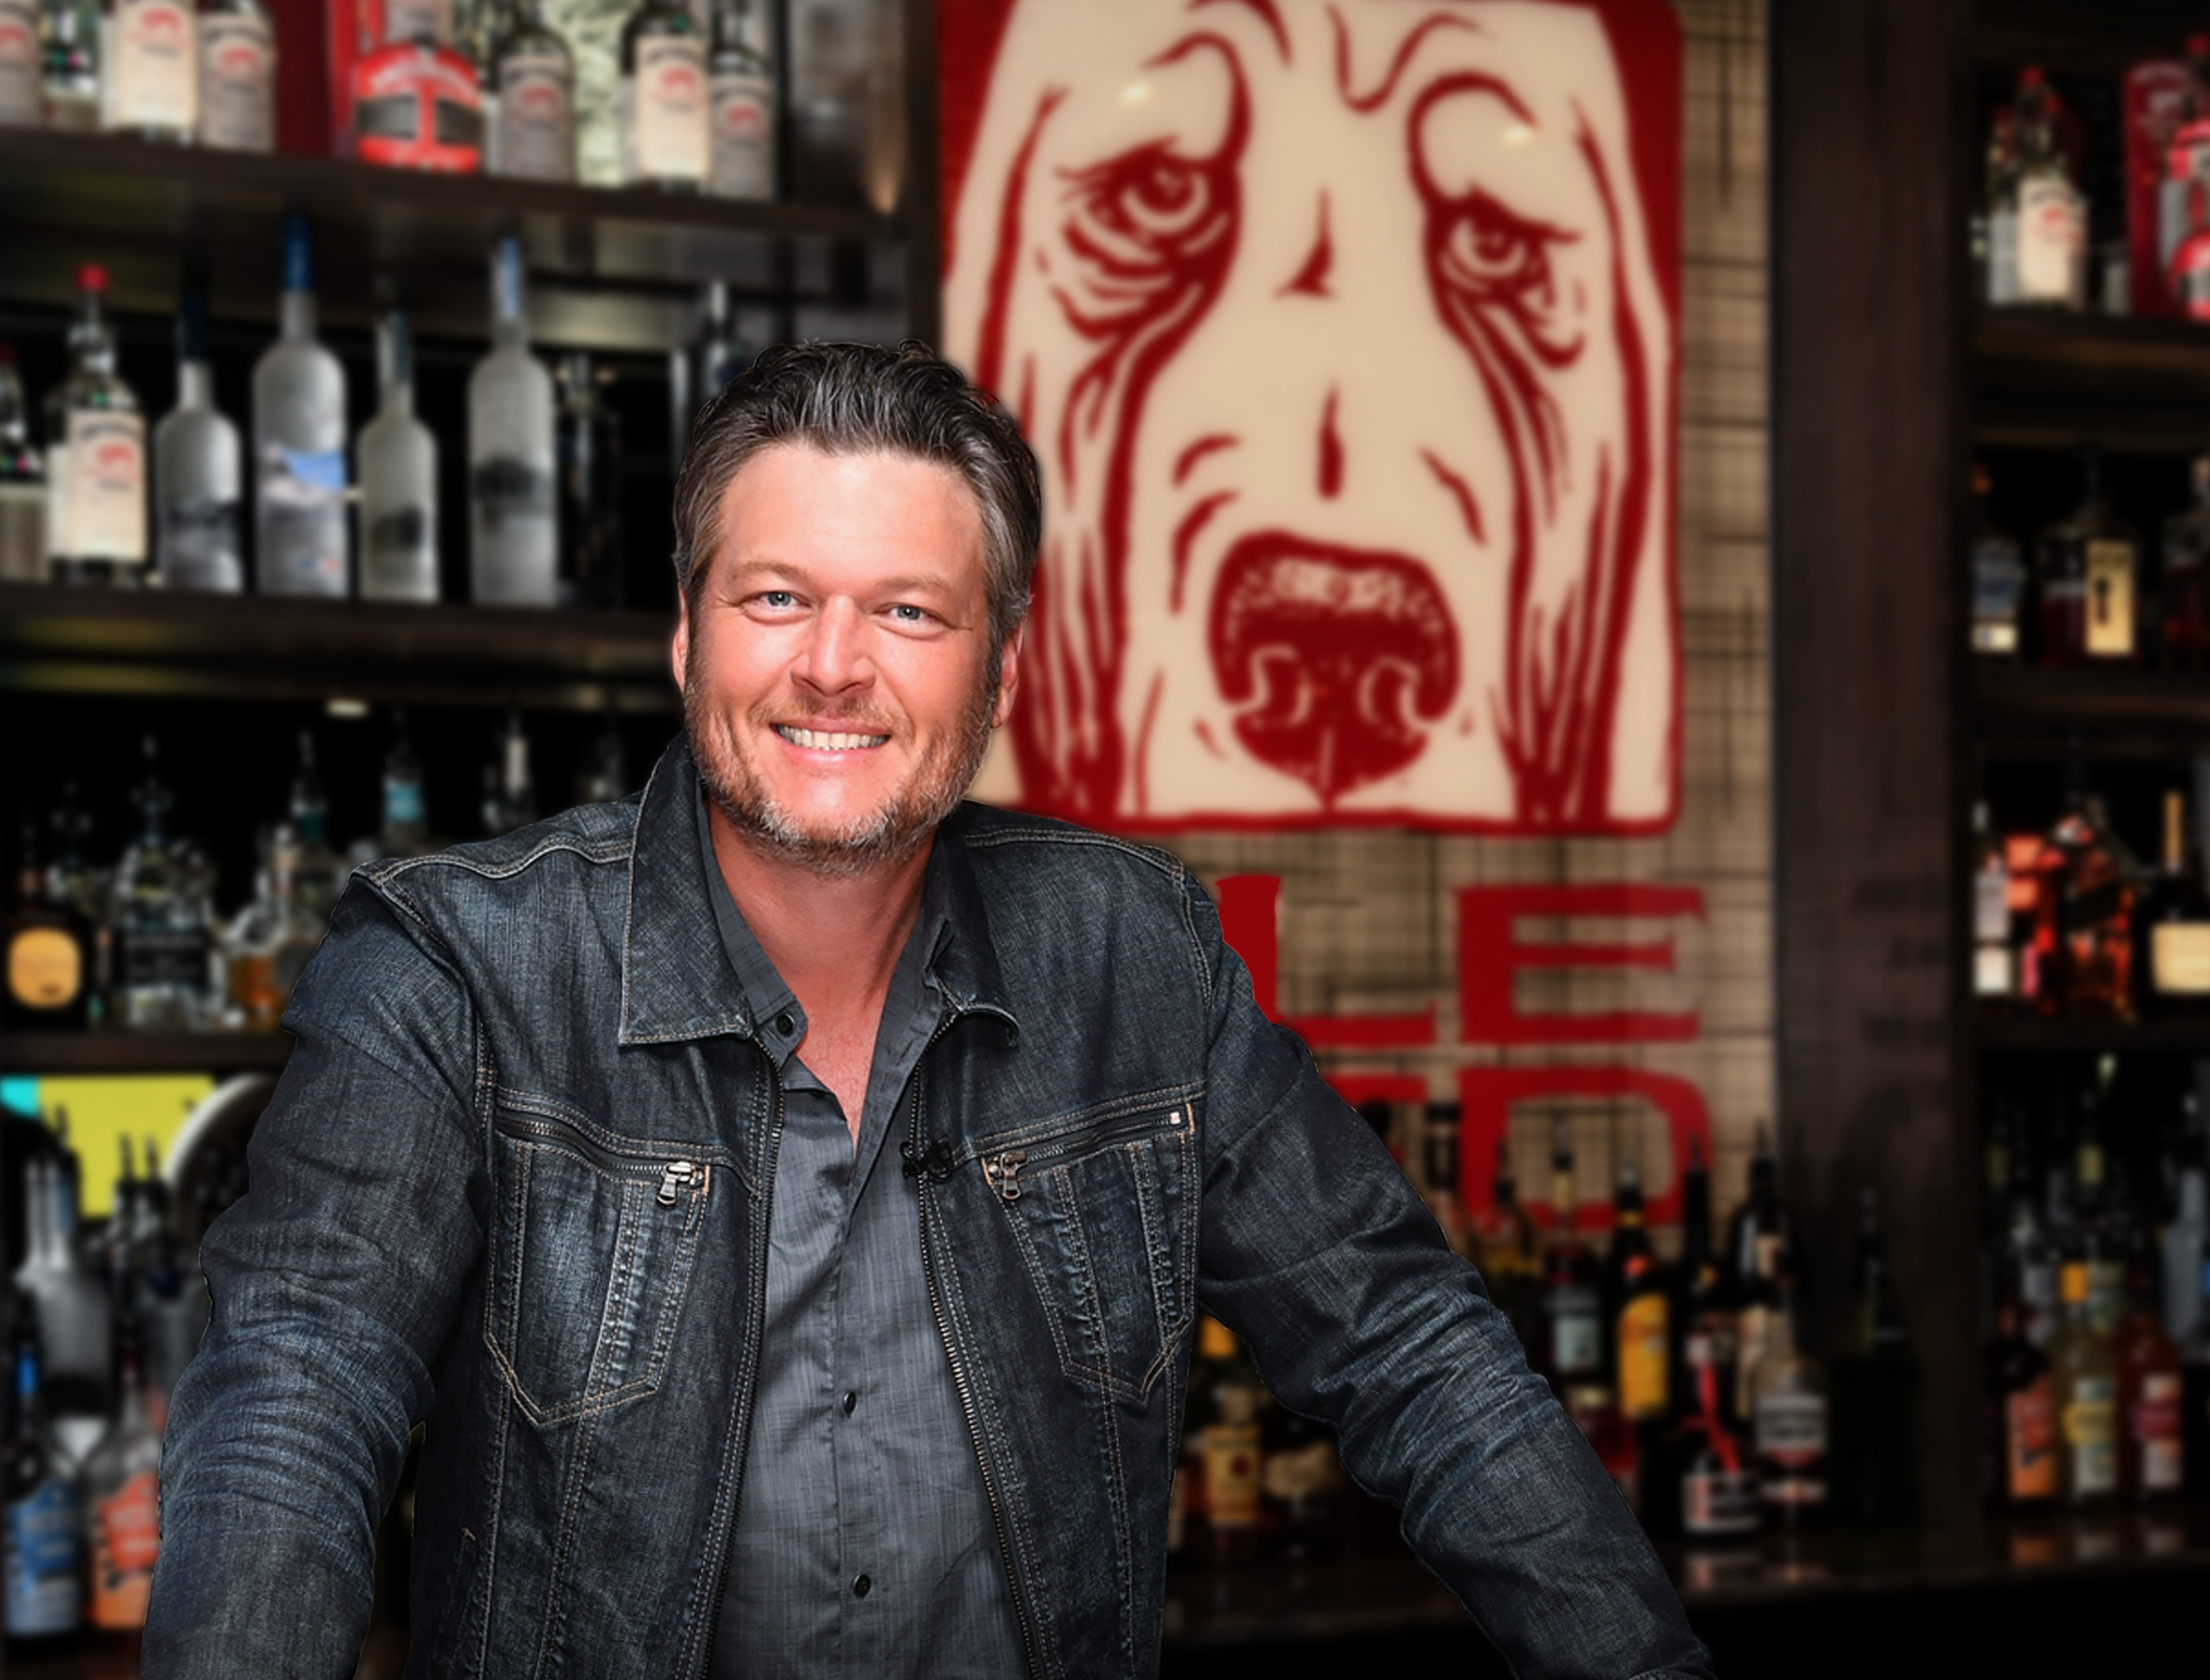 Blake Shelton poses in front of a poster for Ole red